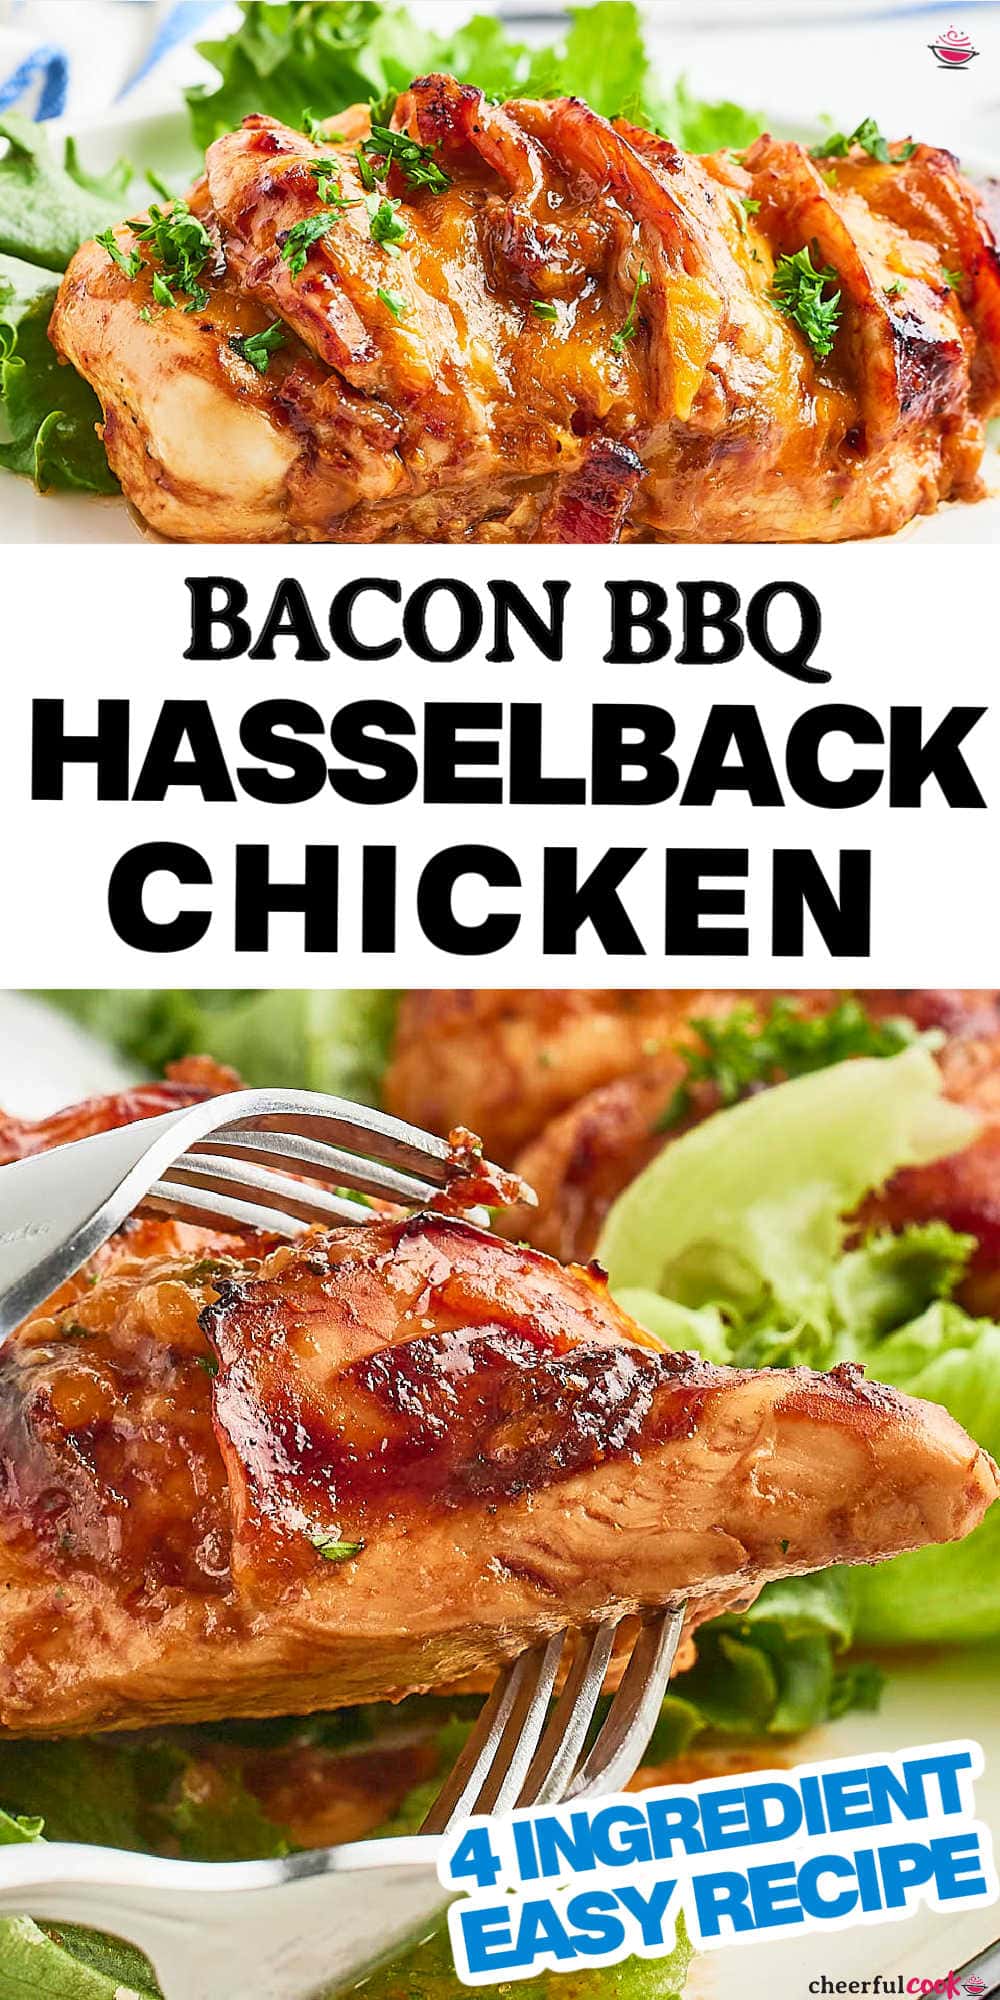 Try our easy and delicious 4-ingredient Hasselback Chicken recipe! It's packed with flavor from BBQ sauce, cheddar cheese, and crumbled bacon. Perfect for a weekday dinner, yet impressive enough for guests. #cheerfulcook #HasselbackChicken #ChickenRecipes #EasyDinner #chickendinner via @cheerfulcook